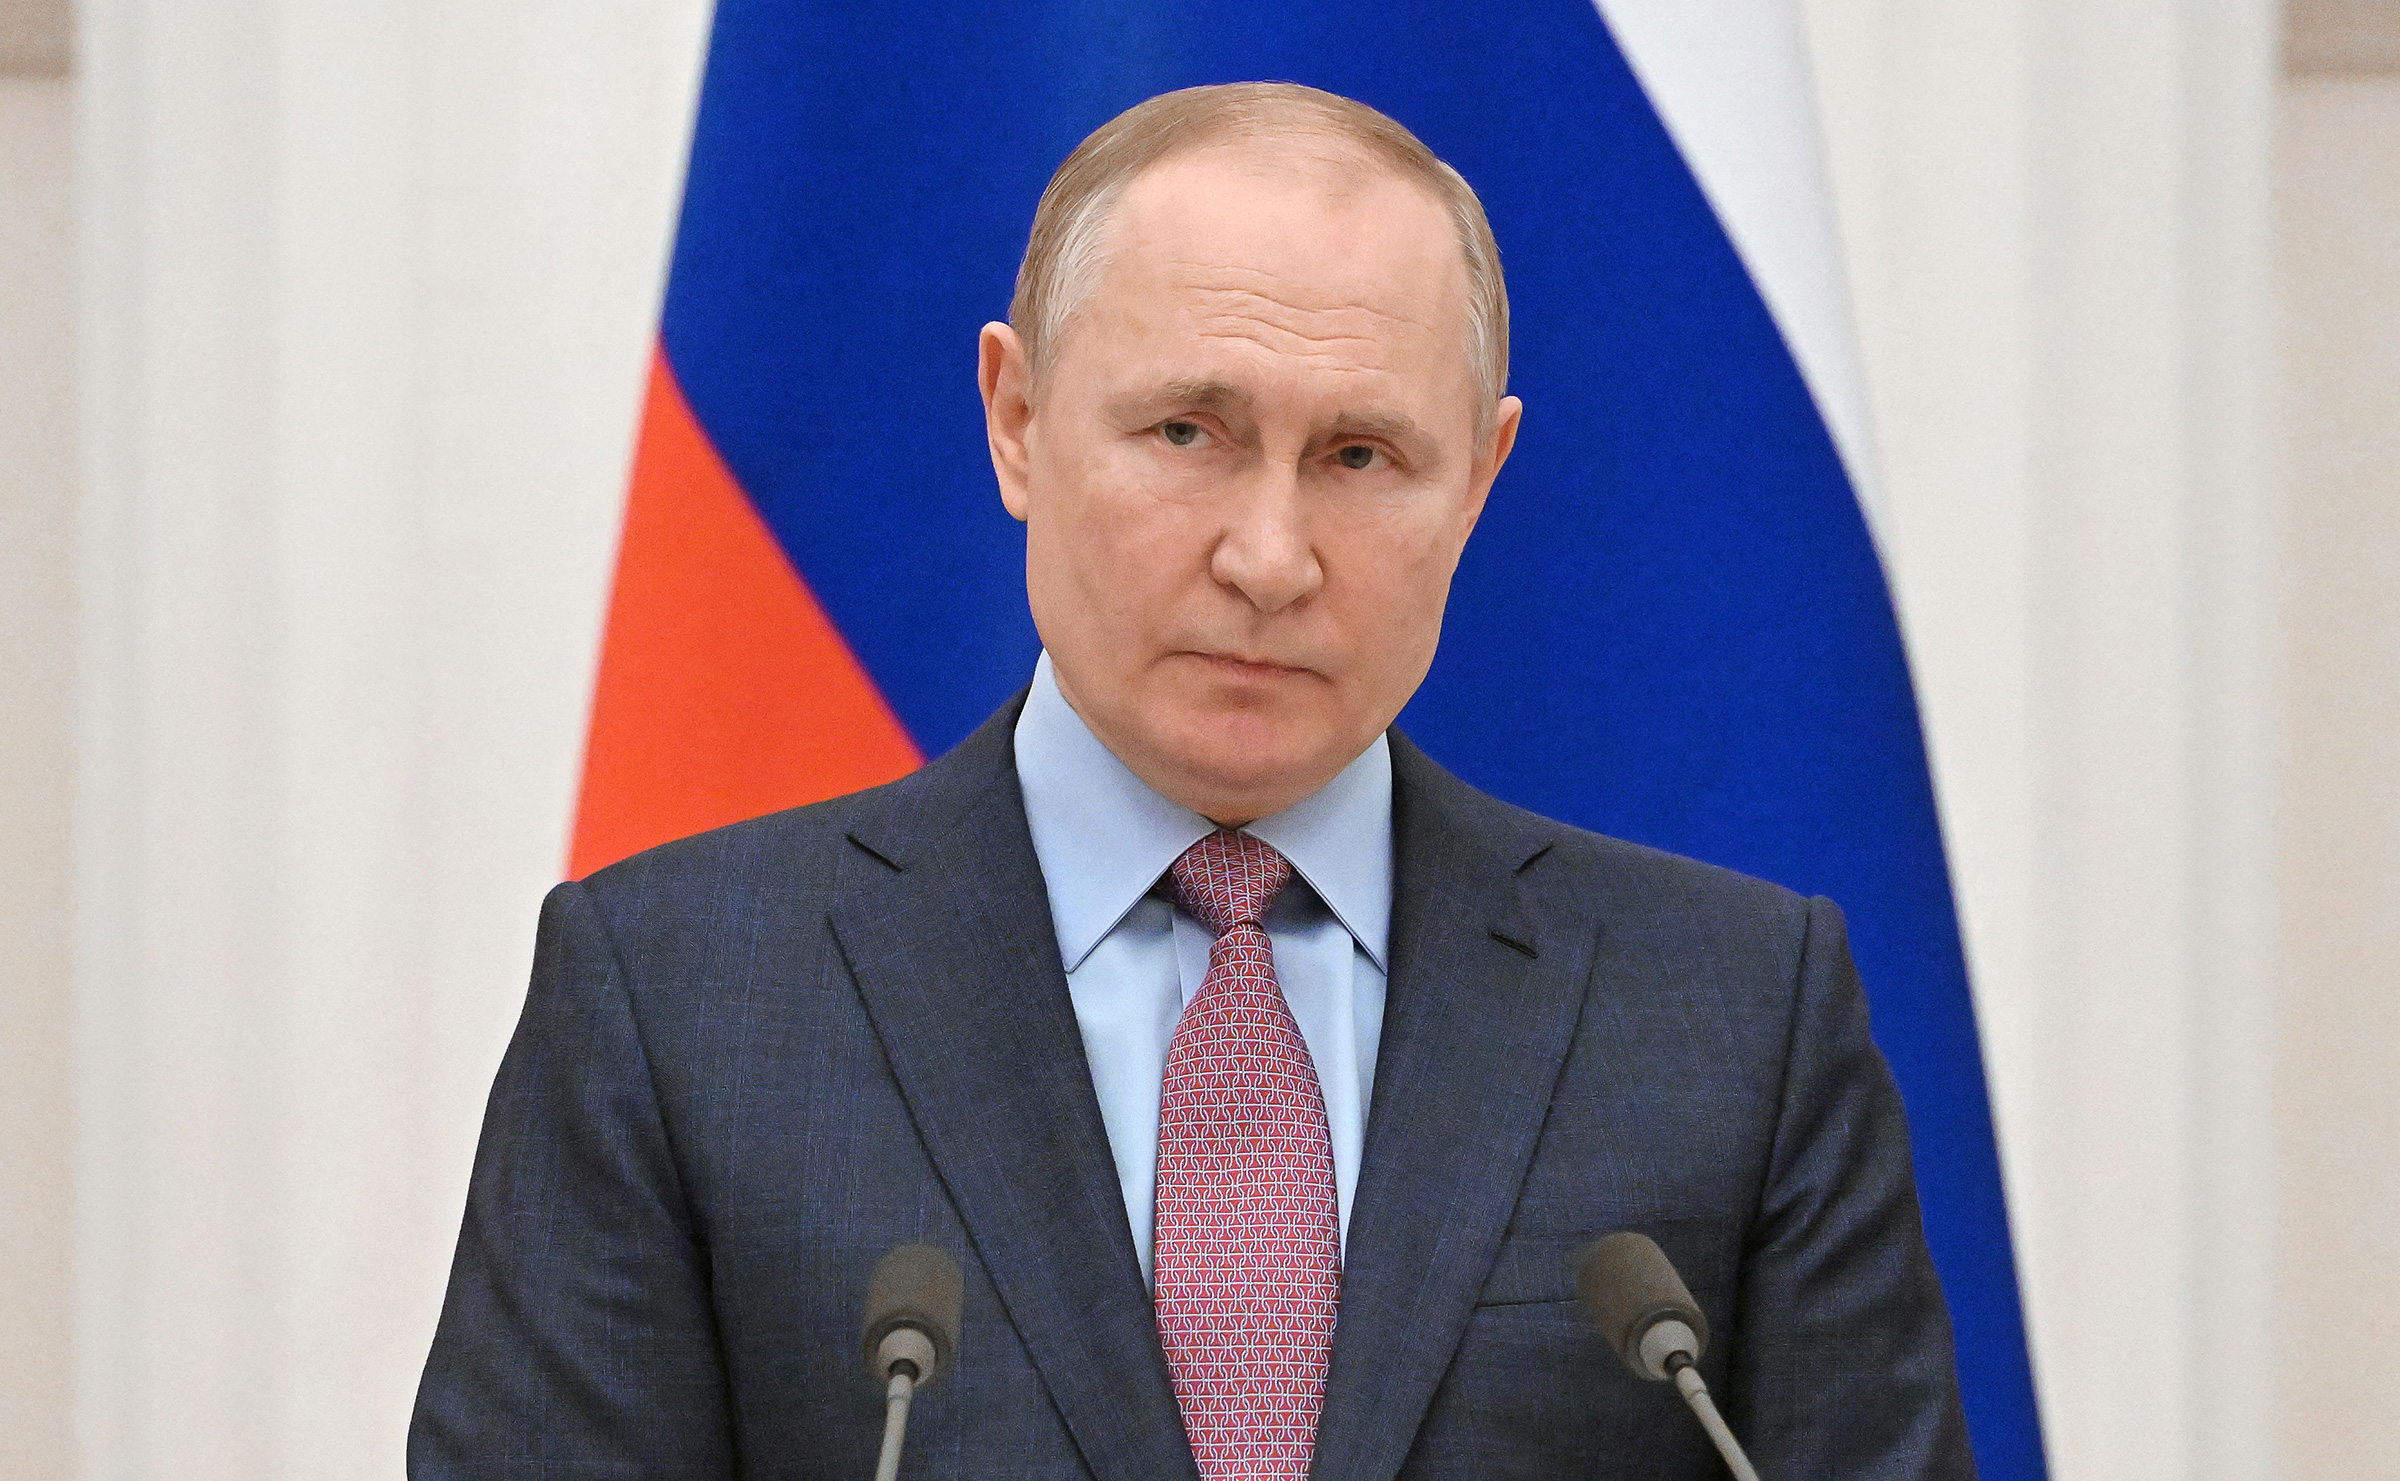 President Vladimir Putin attends a press conference at the Kremlin in Moscow on Feb. 18, 2022.